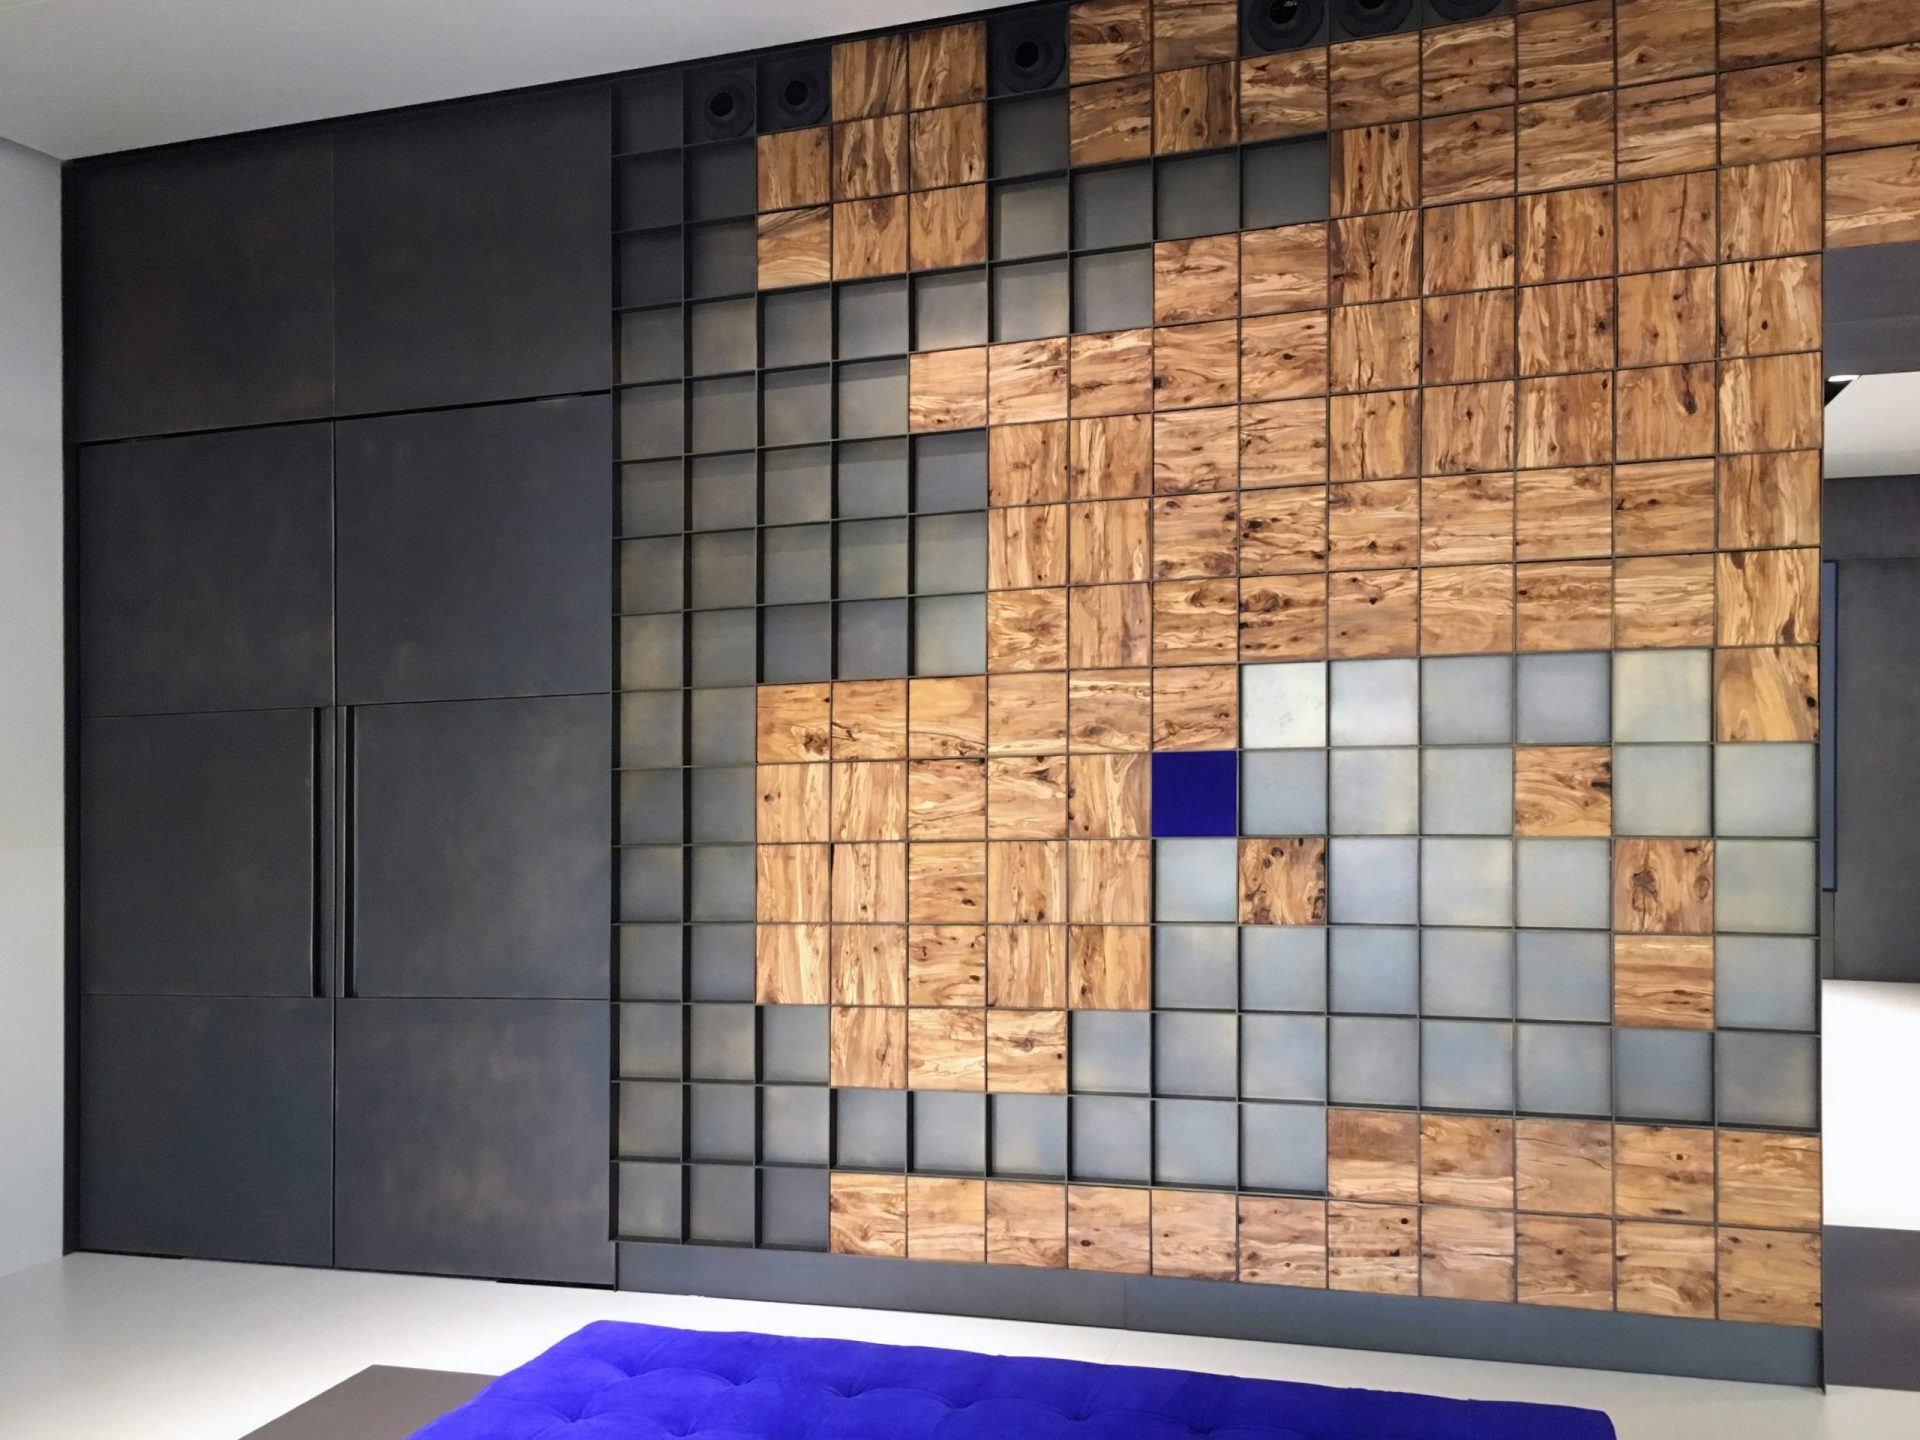 Lobby with metal wall and world map made of wooden squares